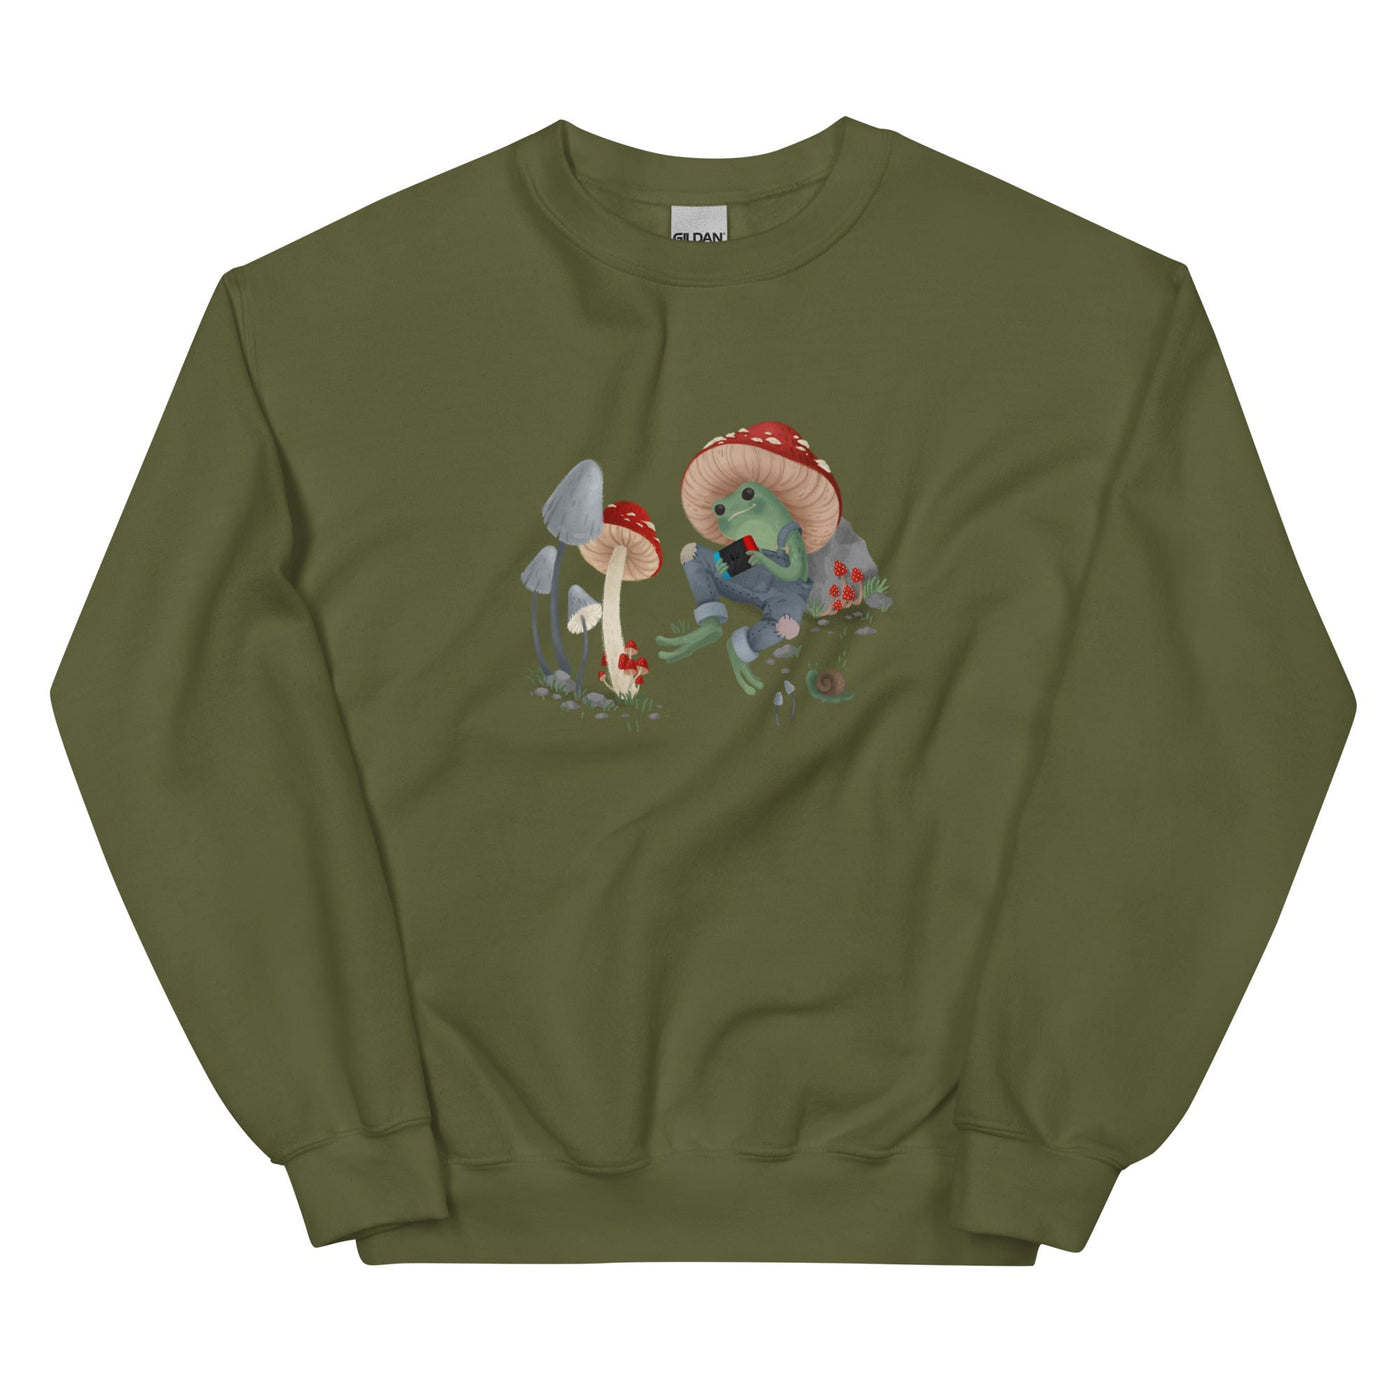 Cottagecore Frog | Unisex Sweatshirt | Cozy Gamer Threads and Thistles Inventory Military Green S 